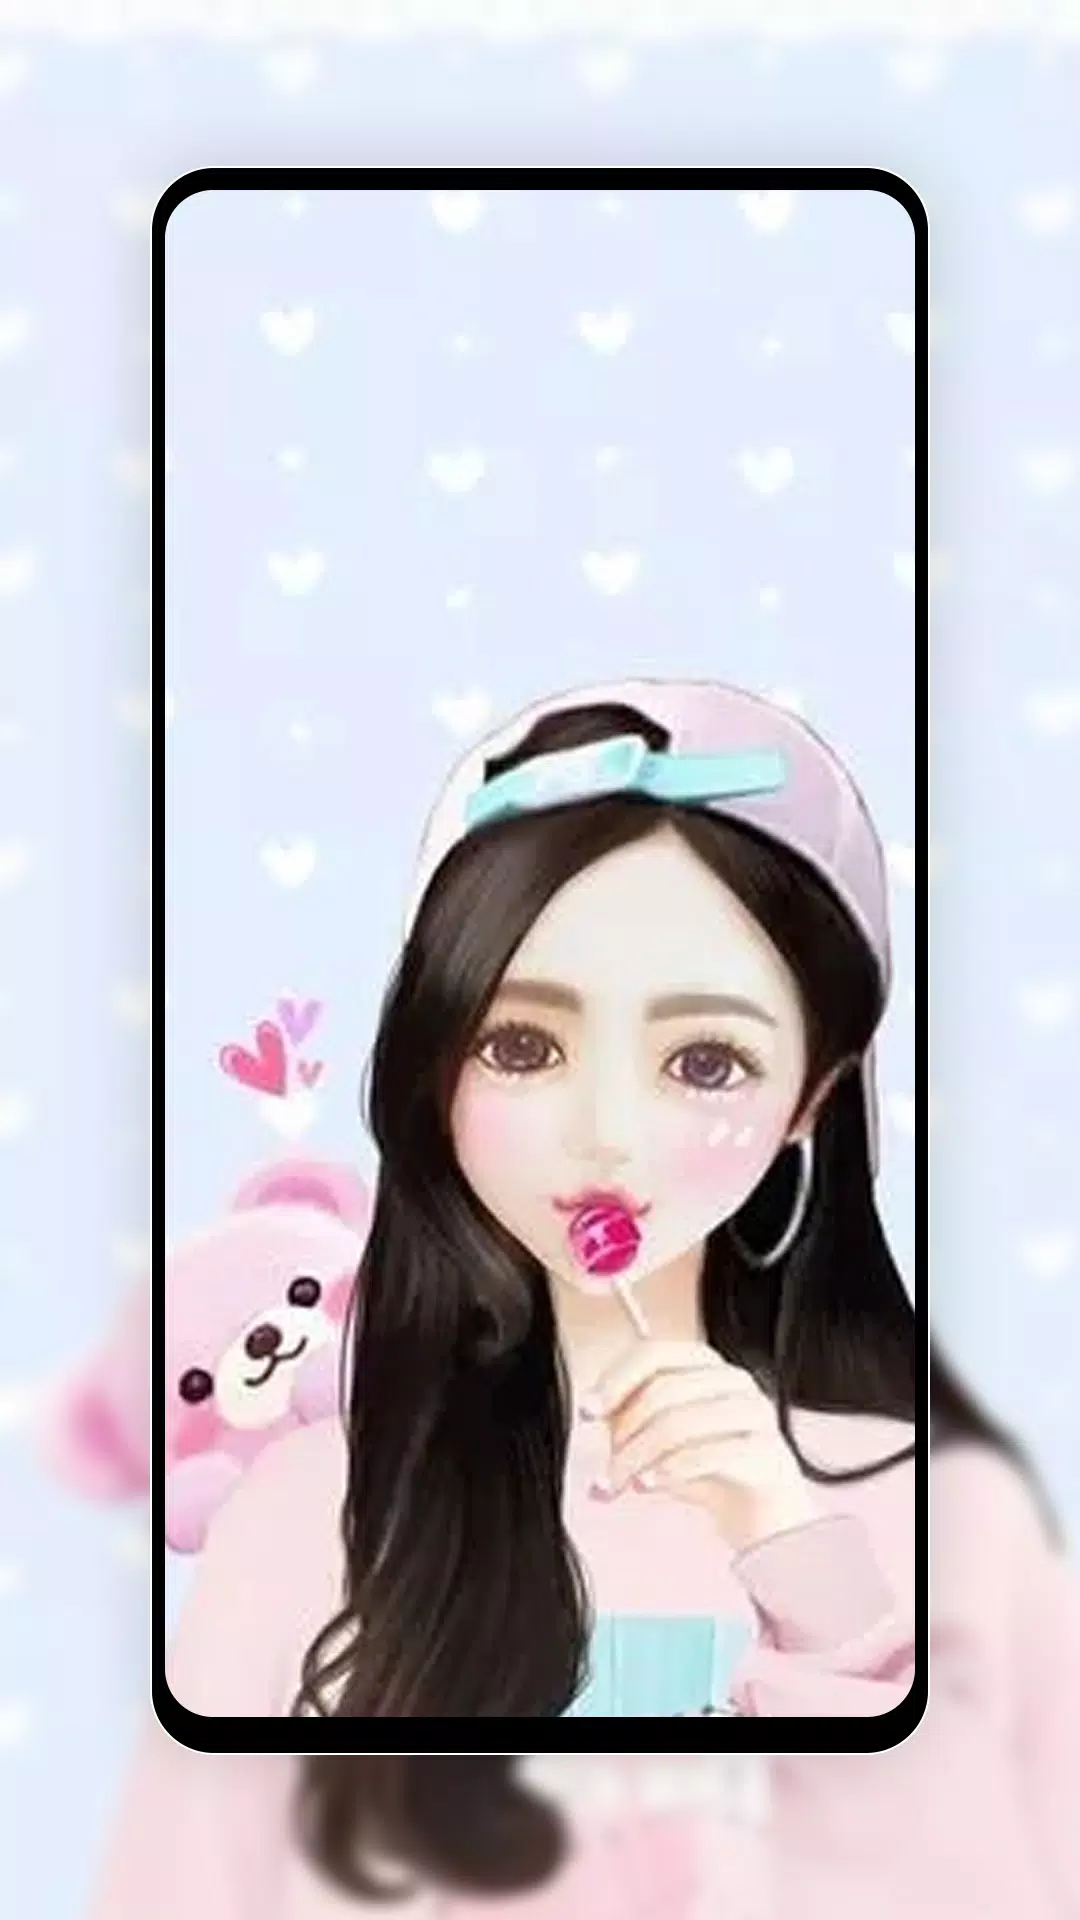 Cute girly wallpapers - Anime girl & cute style APK for Android ...